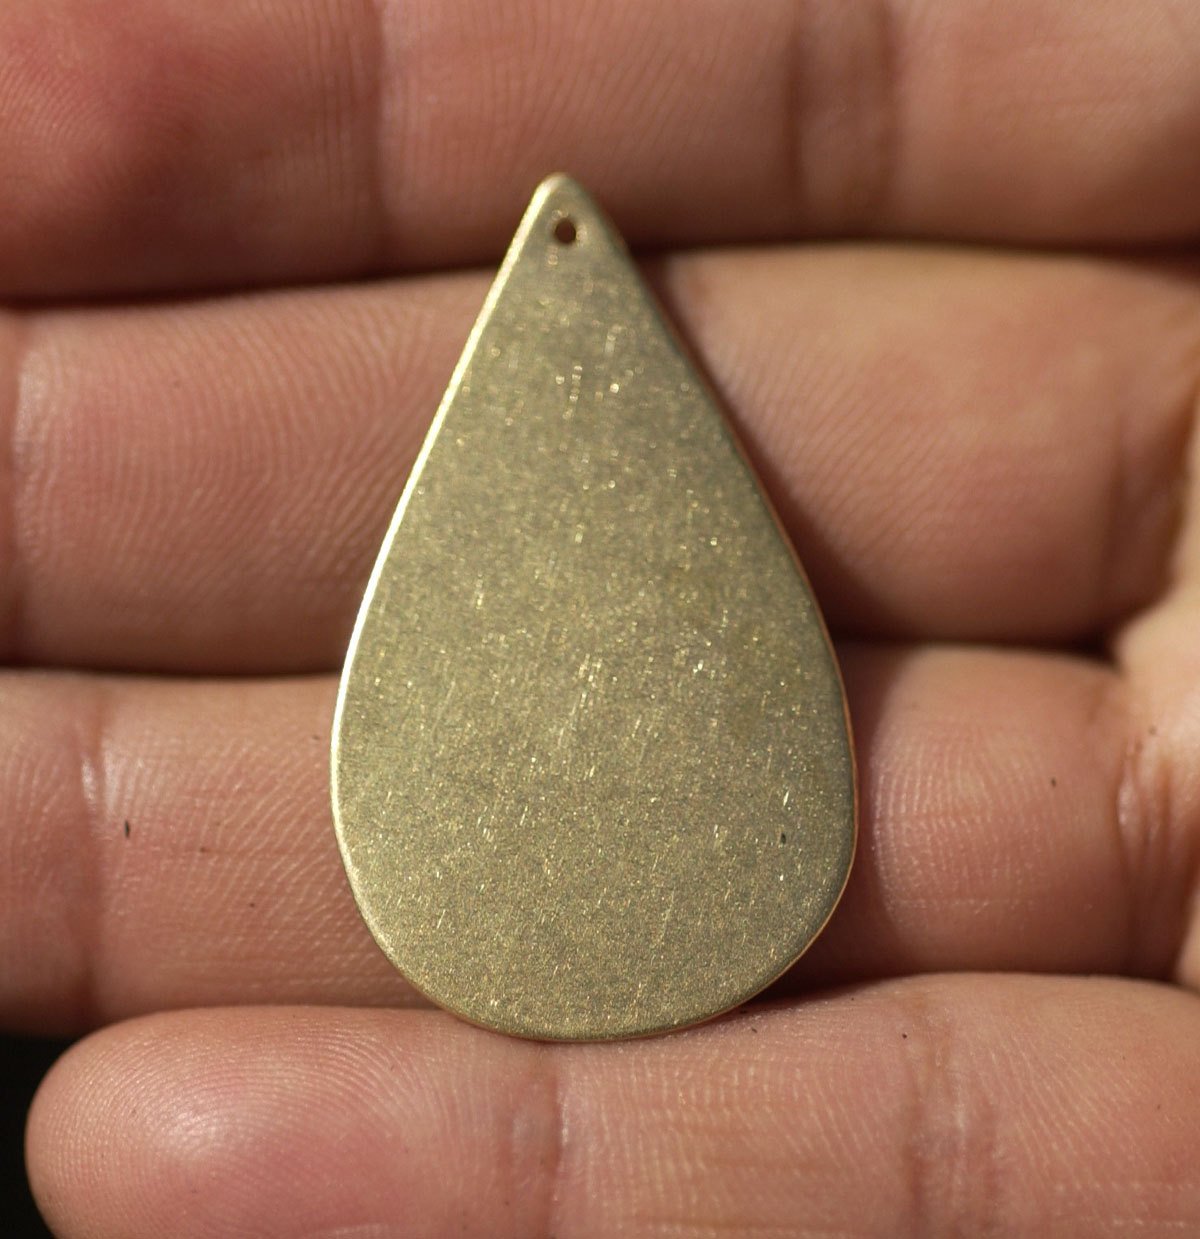 Blanks Large Pointed Teardrop 36mm x 21mm with Hole Blank Shape Stamping Texturing Soldering, Variety of Metals - 4 pieces